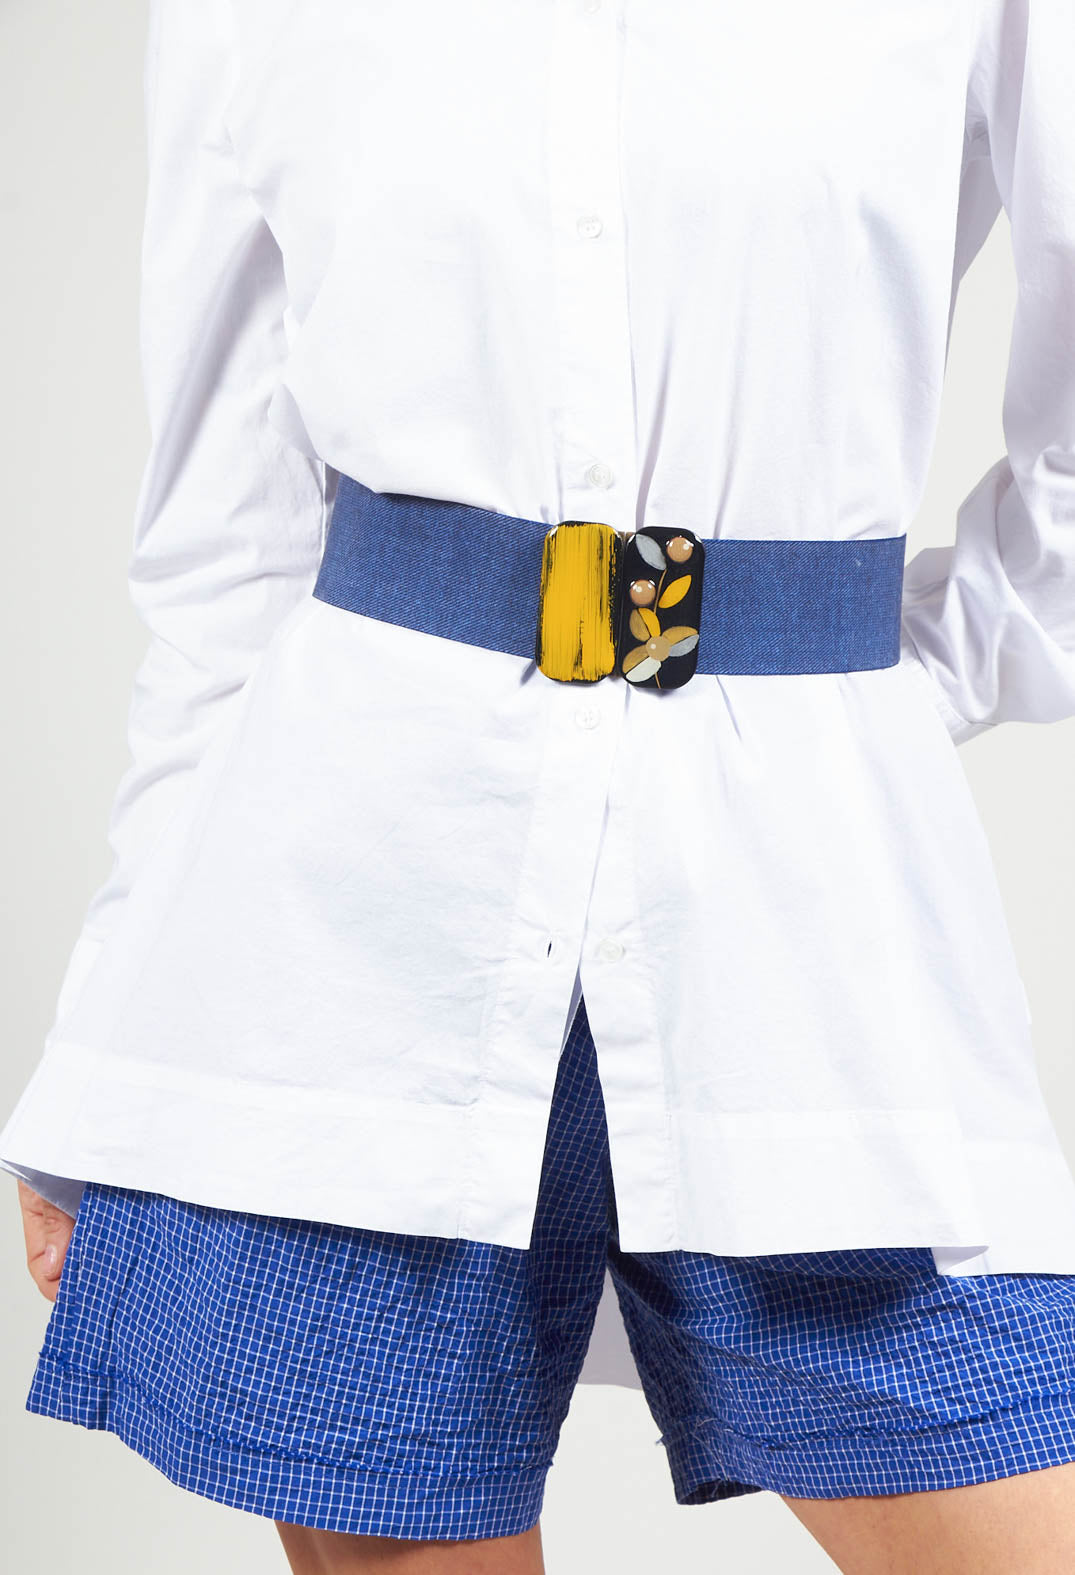 Elasticated Belt with Feature Clasp Buckle in Blue